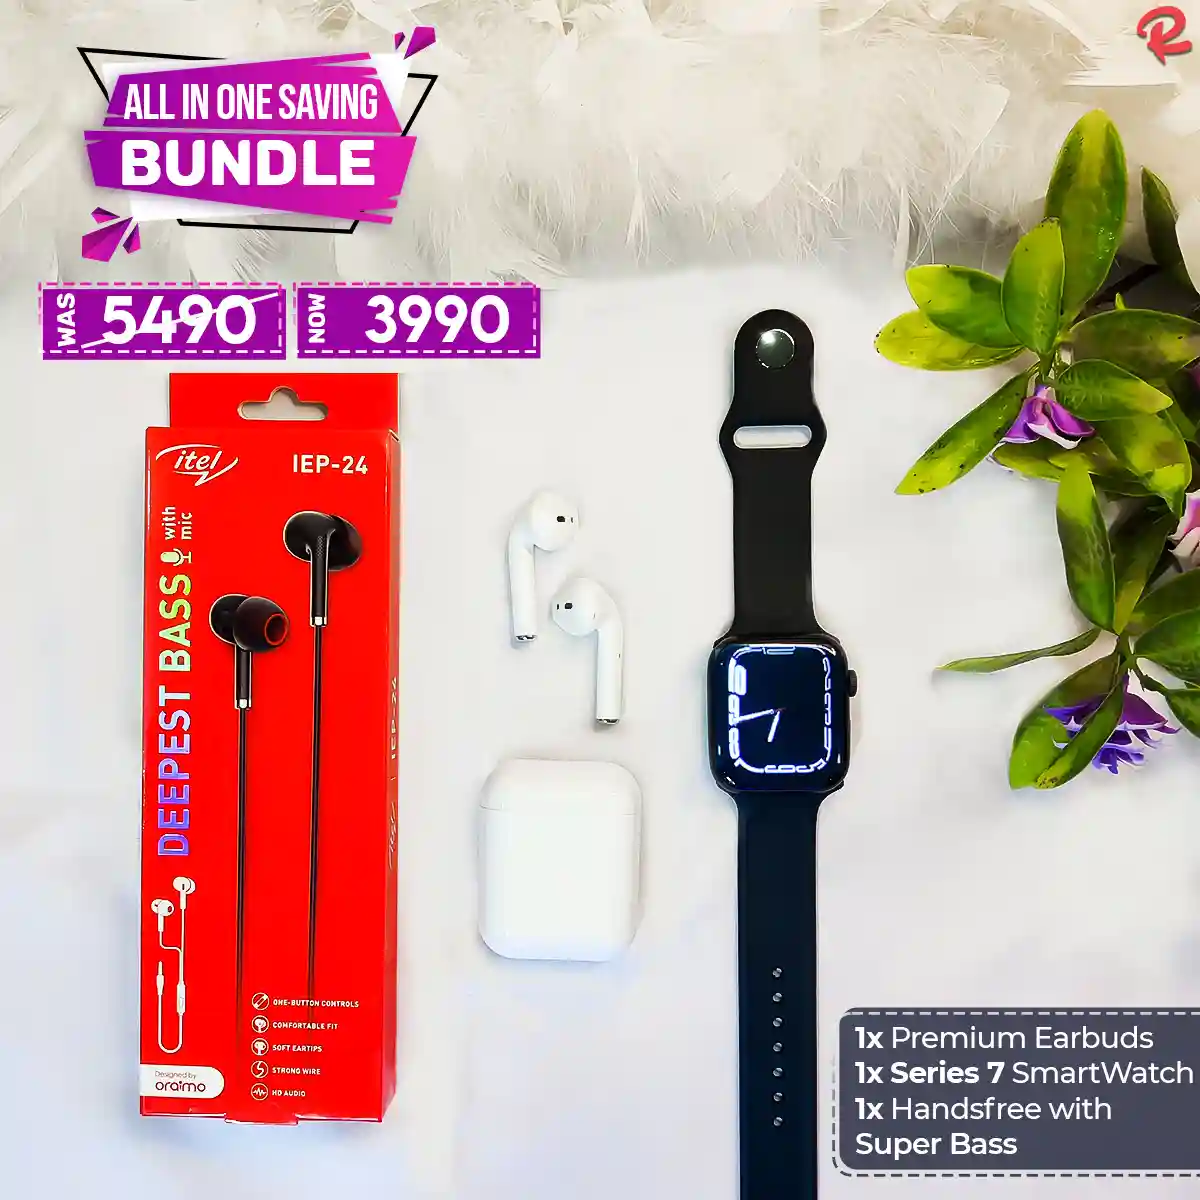 Buy All in one bundle| smart watch, earpods , and handsfree at best price | Rhizmall.pk